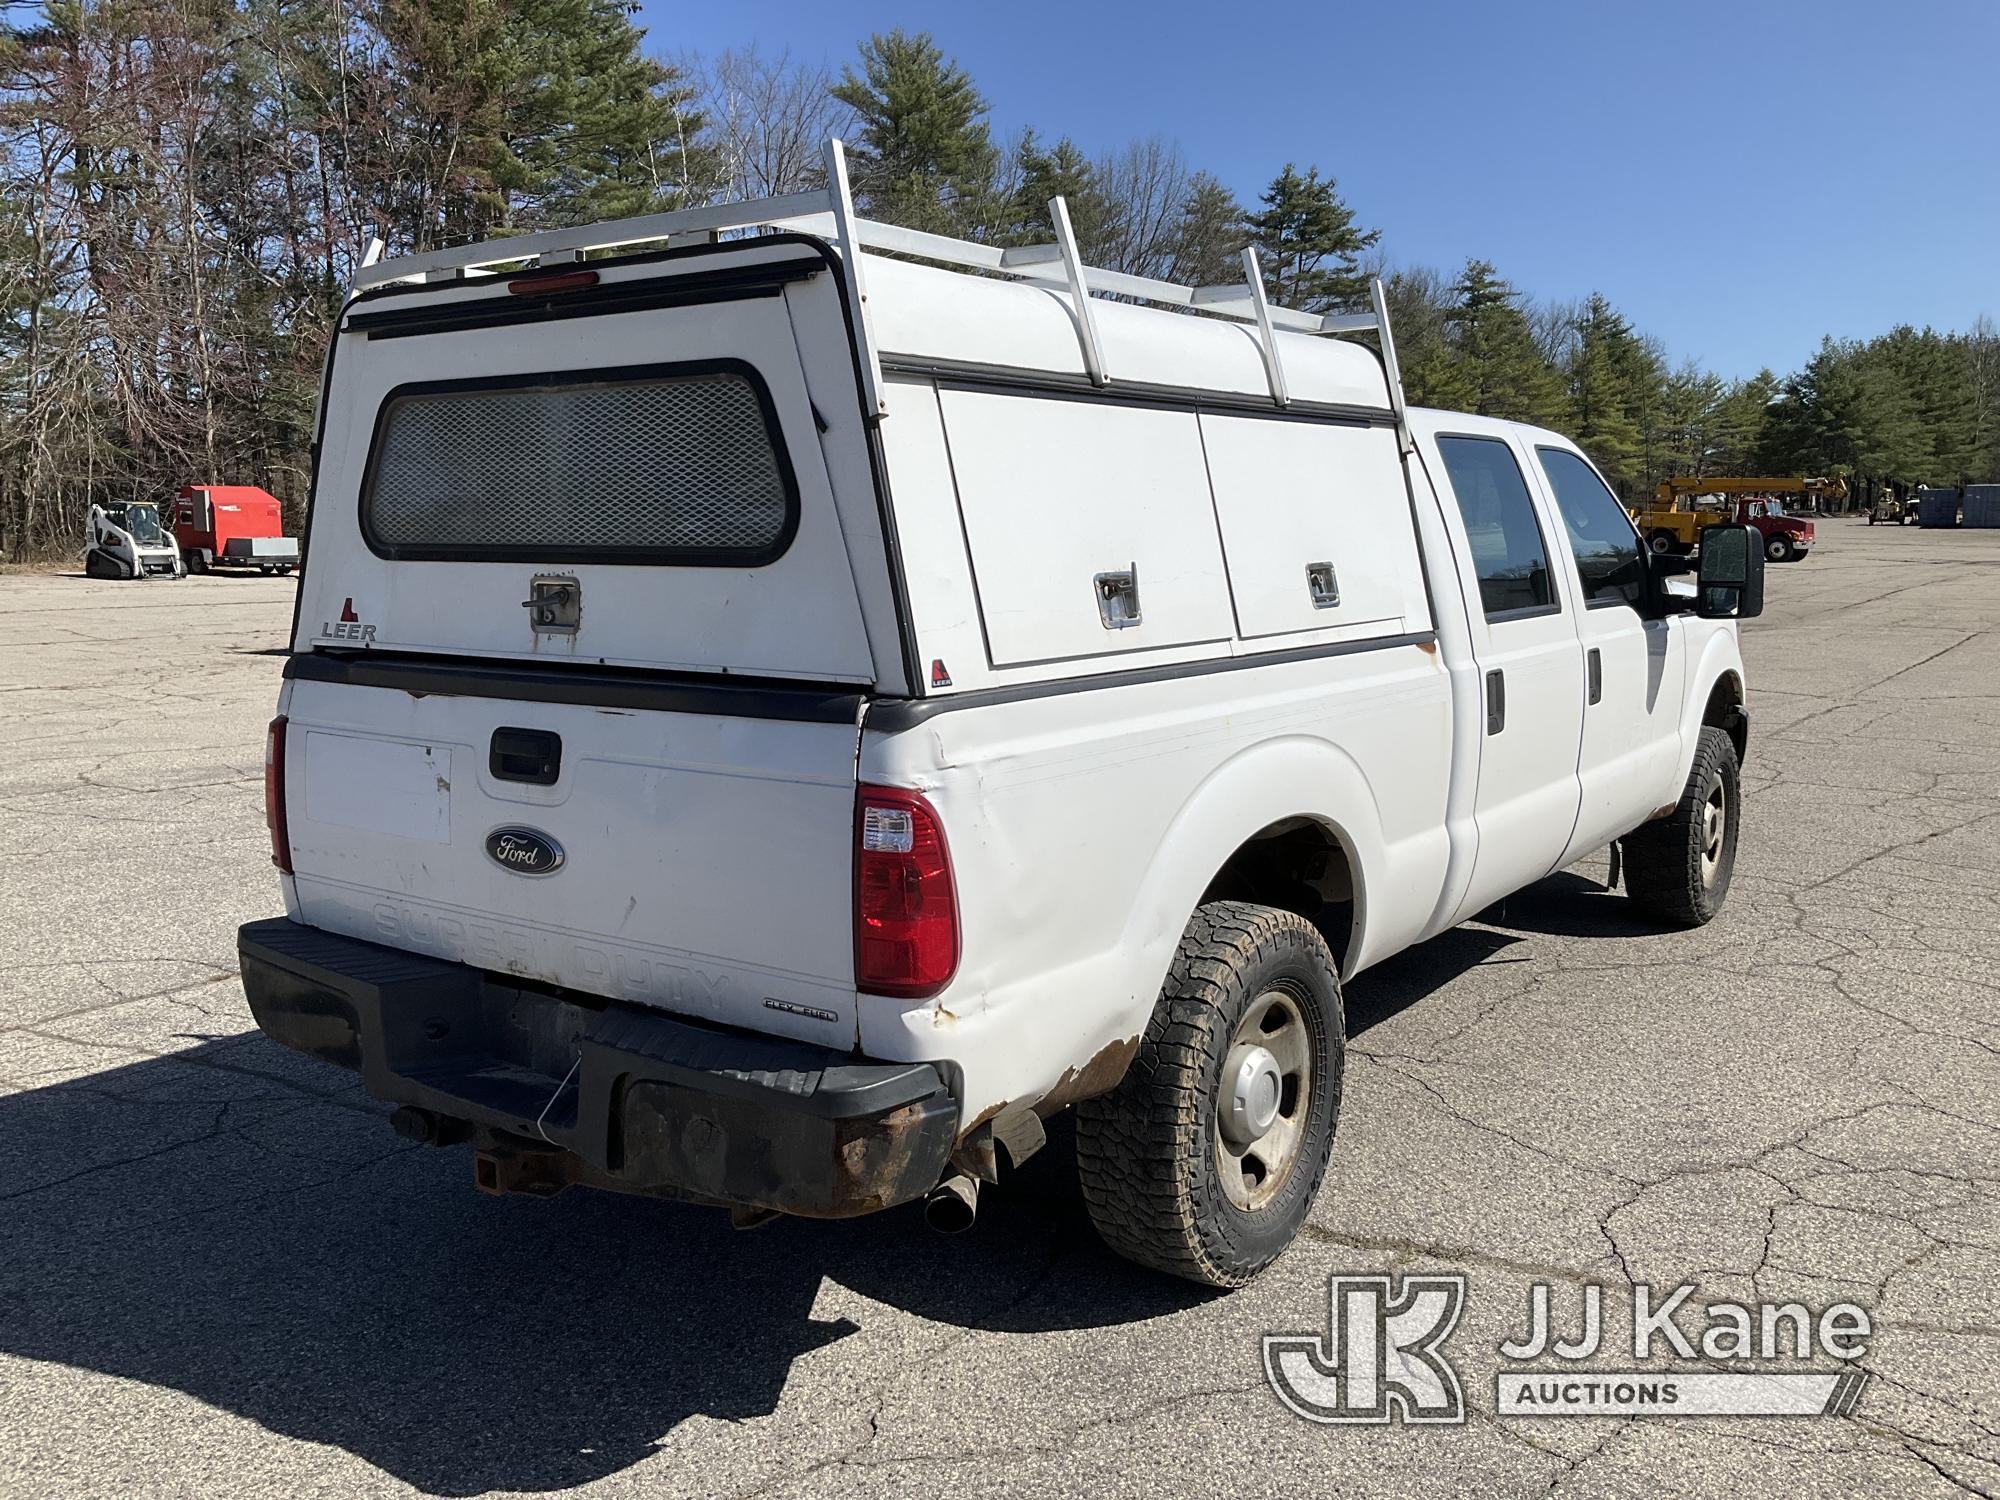 (Wells, ME) 2016 Ford F250 4x4 Crew-Cab Pickup Truck Runs & Moves) (Check Engine Light On, Body/Rust